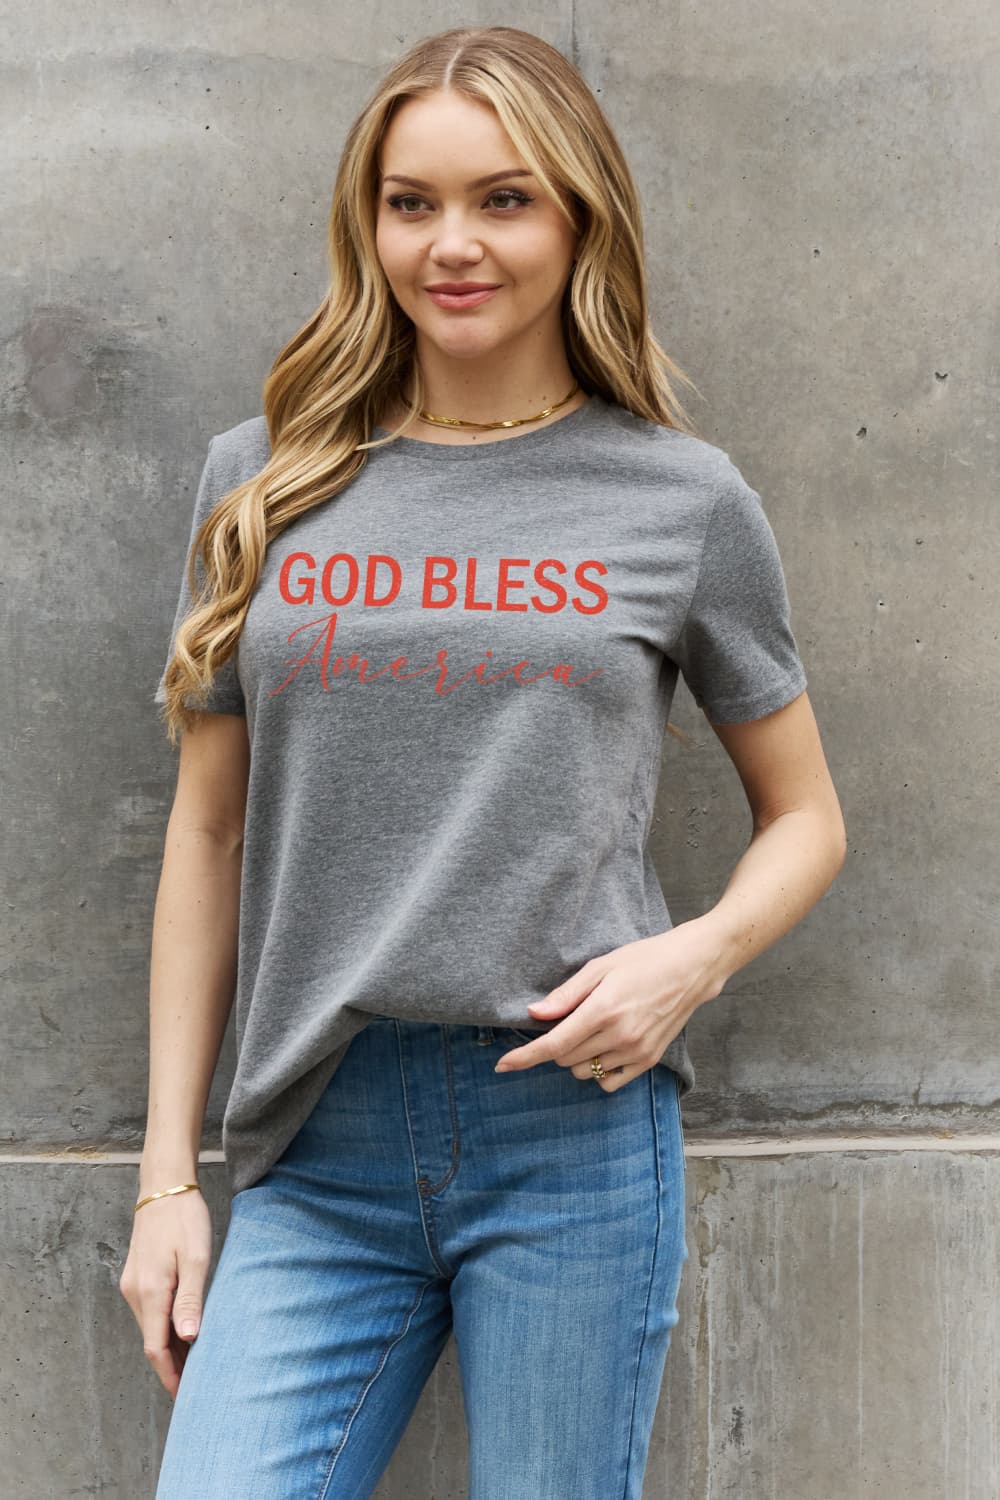 Simply Love GOD BLESS AMERICA Graphic Cotton Tee-TOPS / DRESSES-[Adult]-[Female]-2022 Online Blue Zone Planet